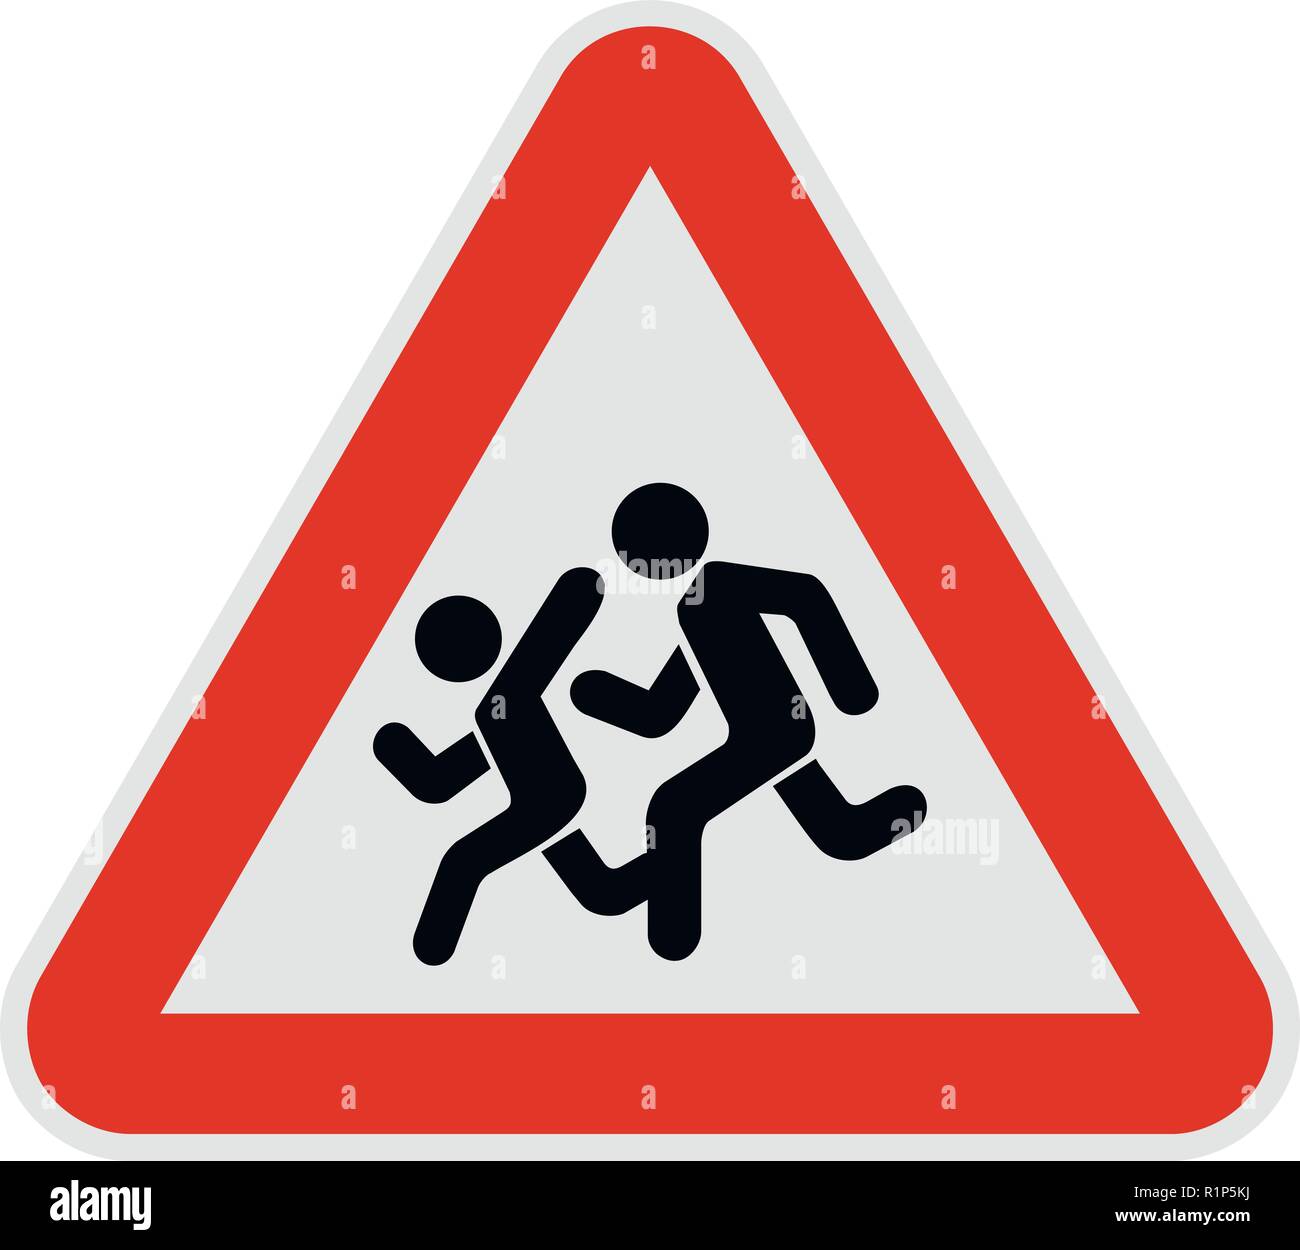 Beware Children Crossing Road Sign High Resolution Stock Photography ...